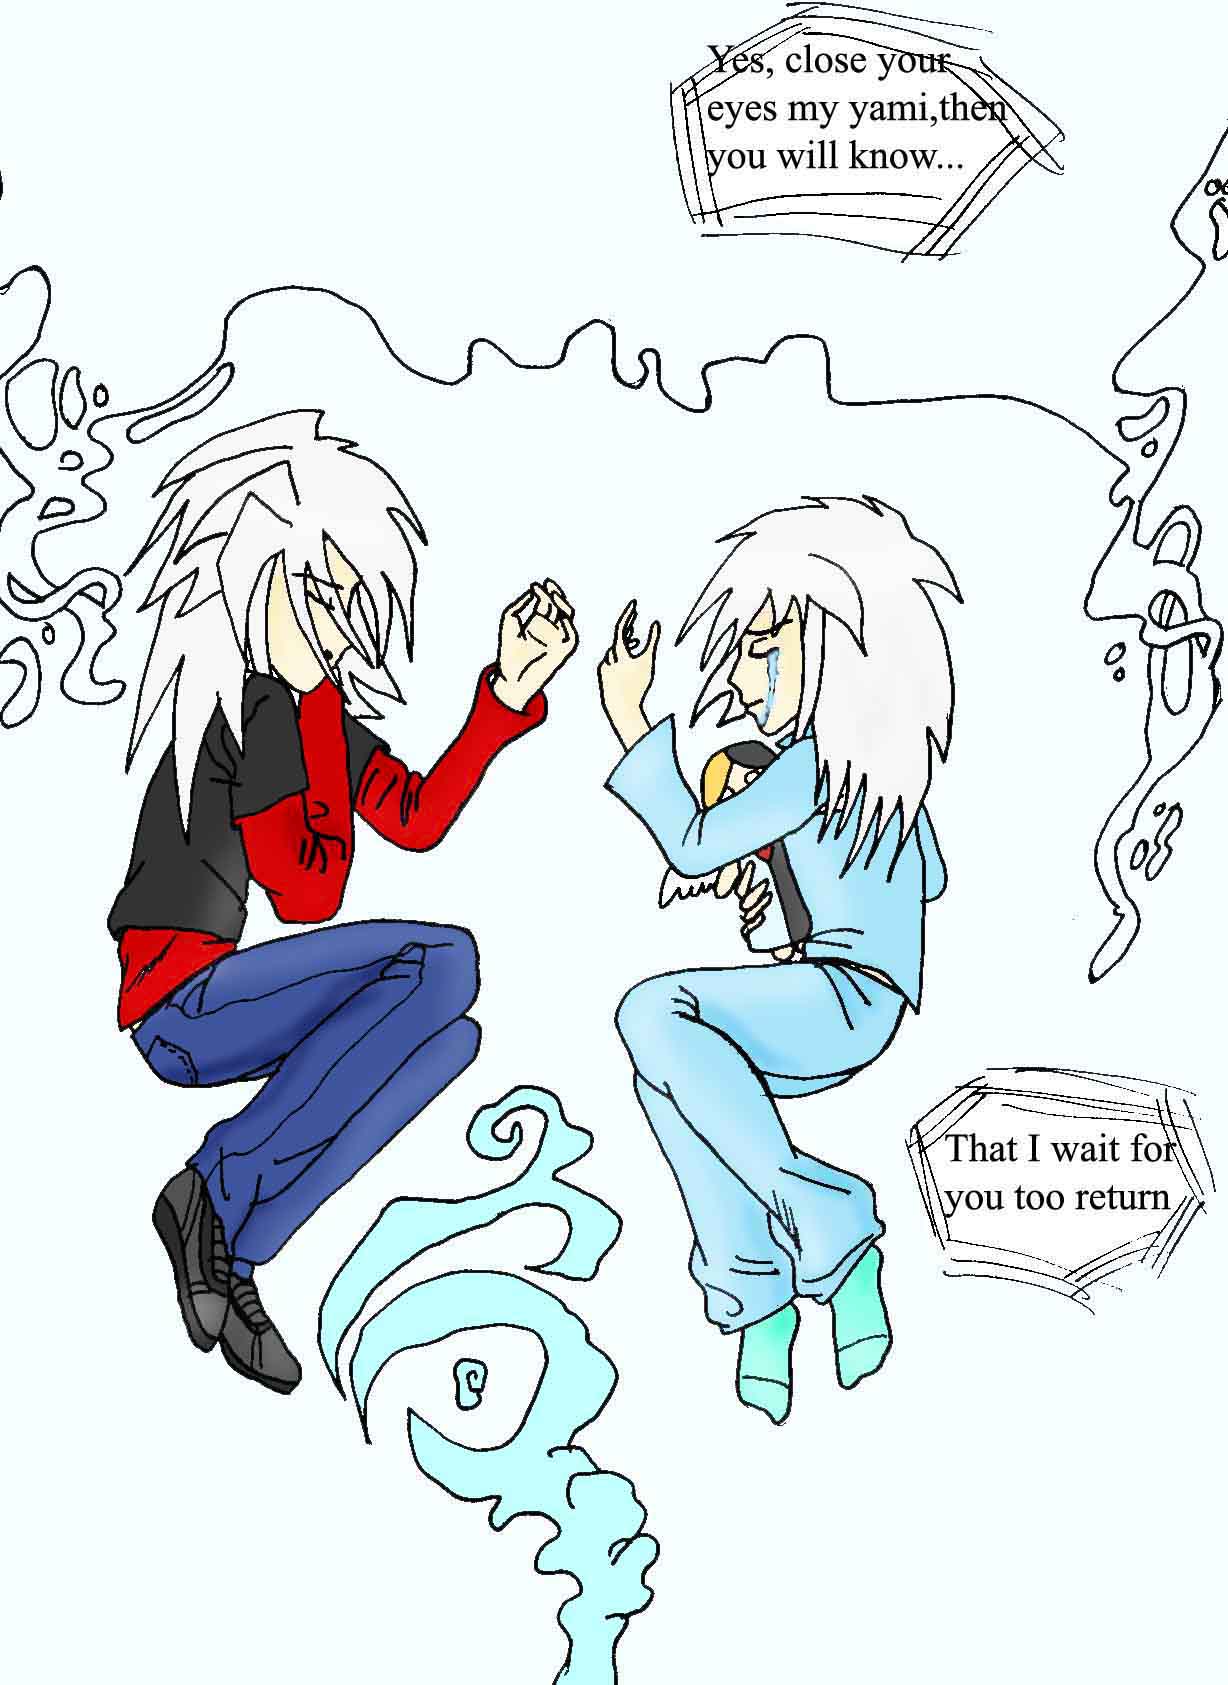 "Maybe we will dream of each other" Bakura X Ryou by Bakura_Angel_of_Light